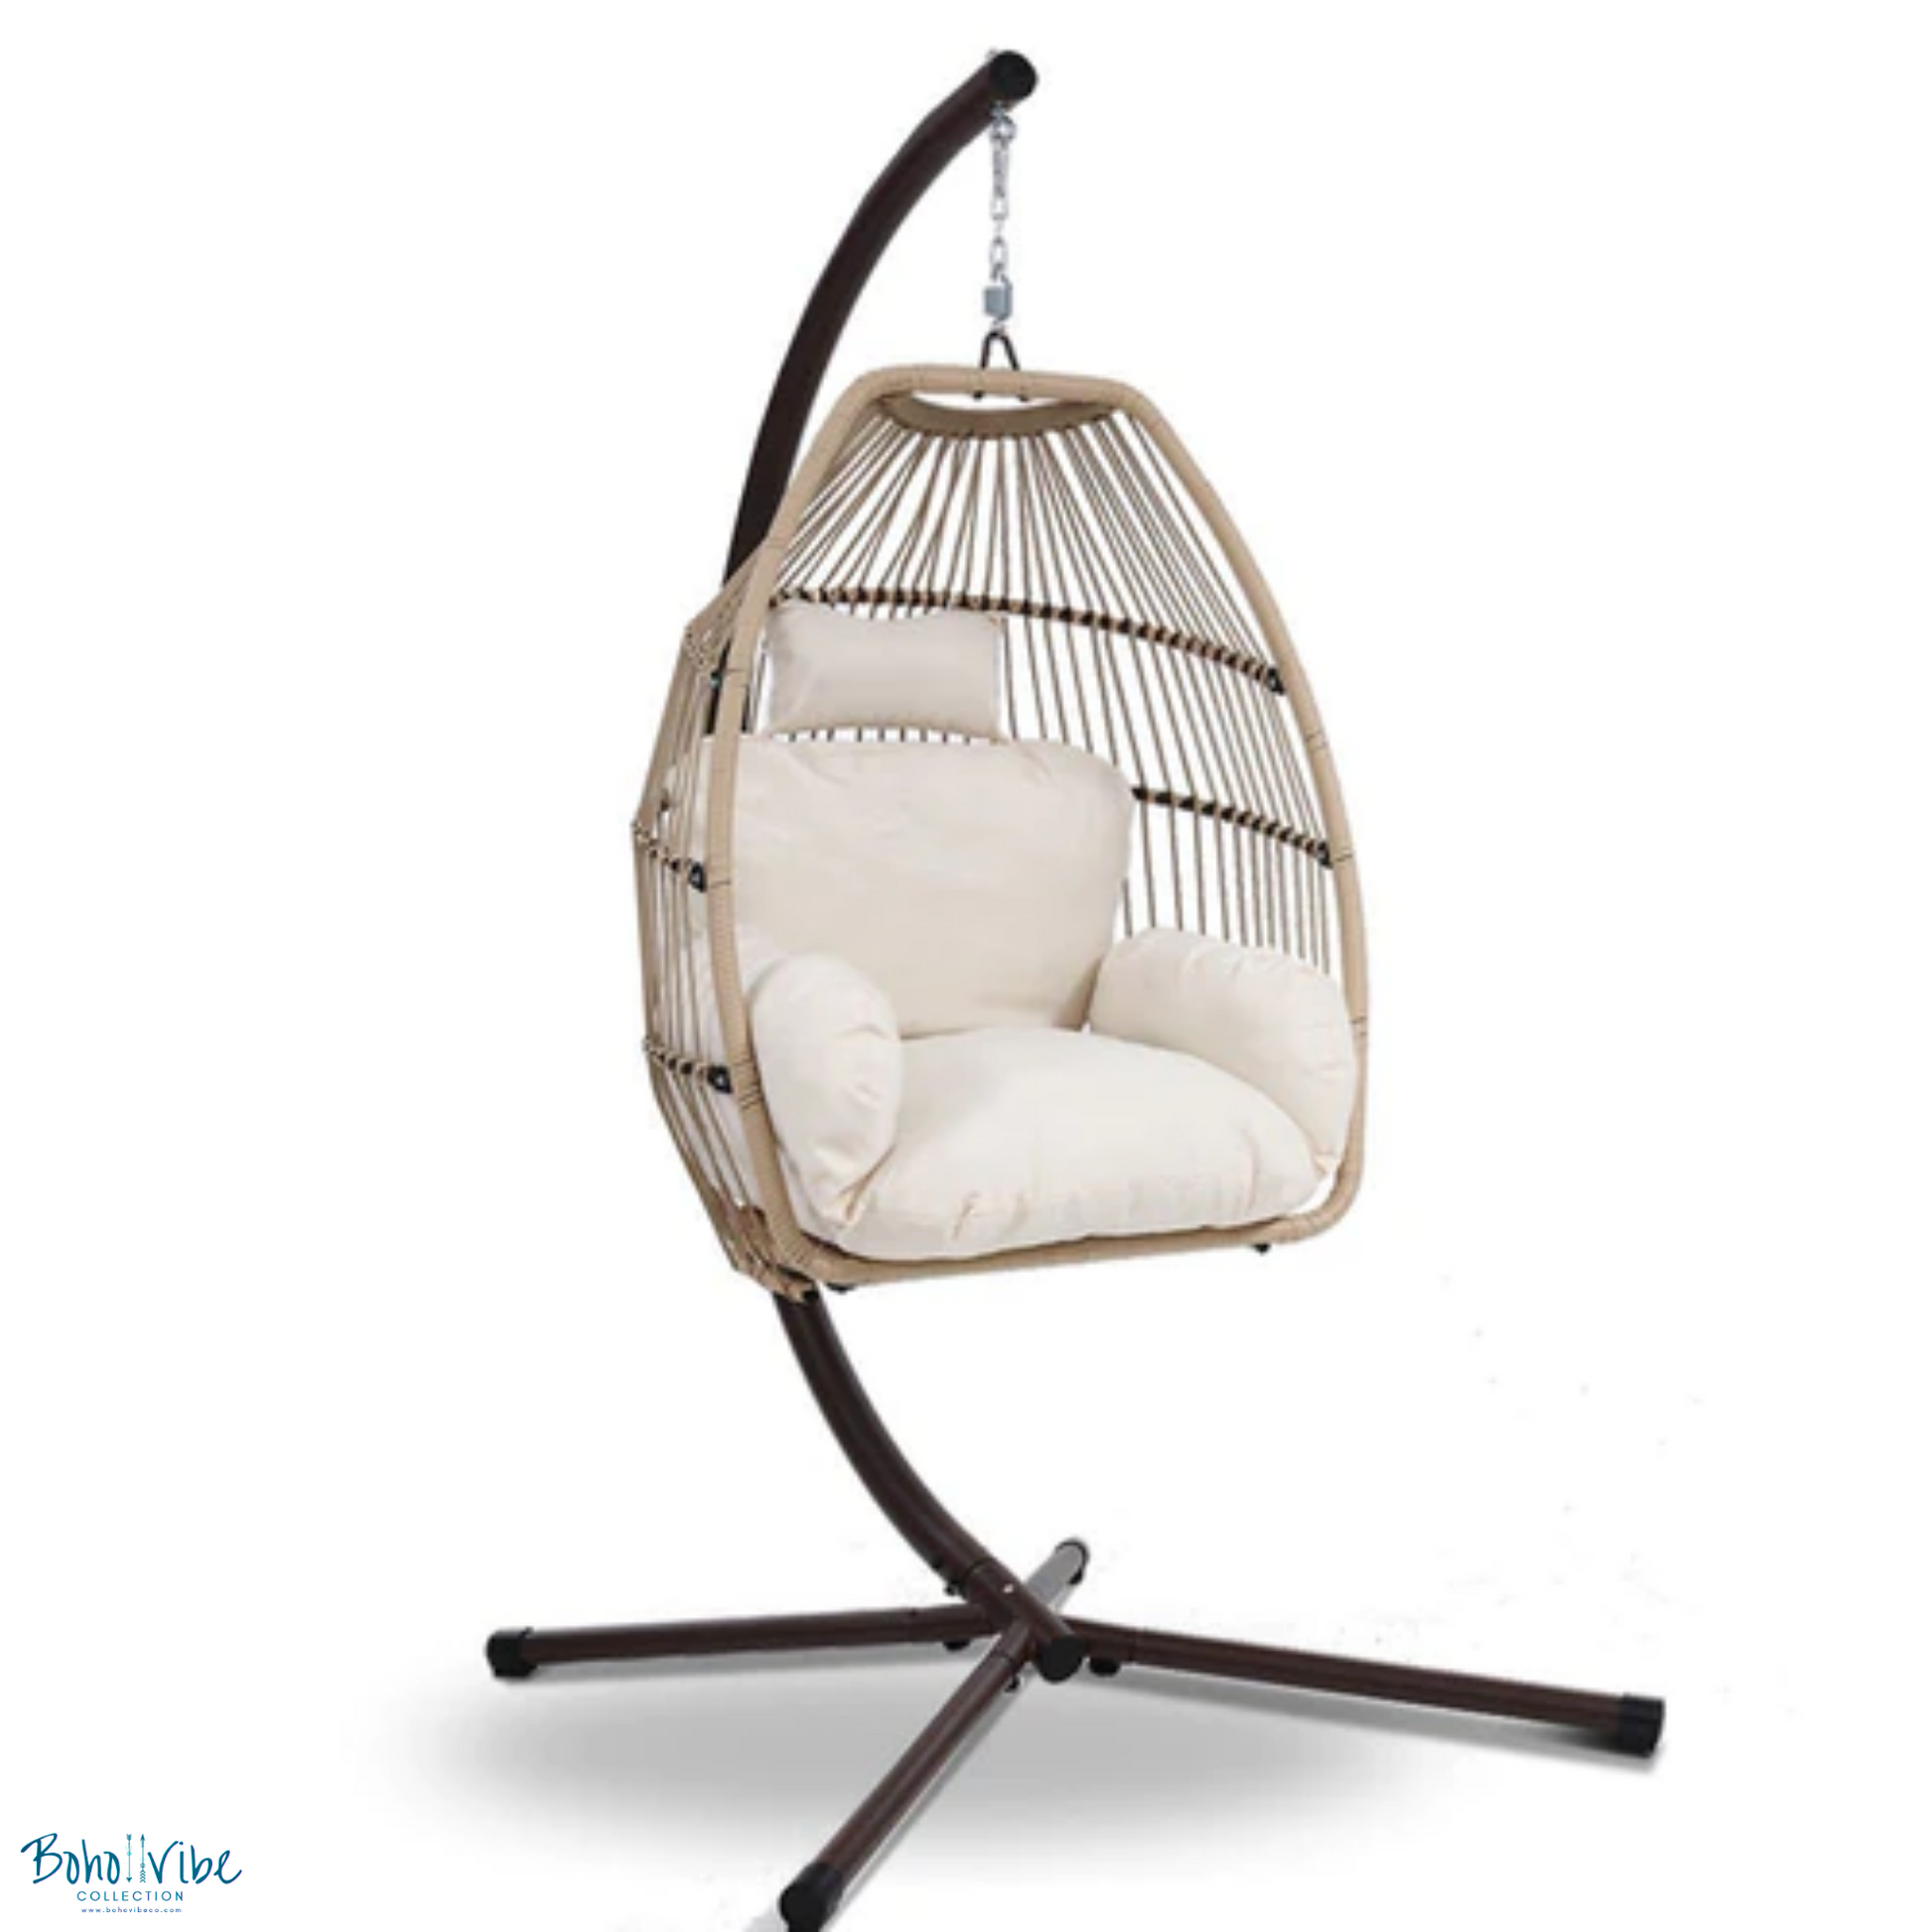 Boho ↡↟ Vibe Collection ↠ Wicker Single Hanging Pod Egg Swing Hammock Chair with Stand 